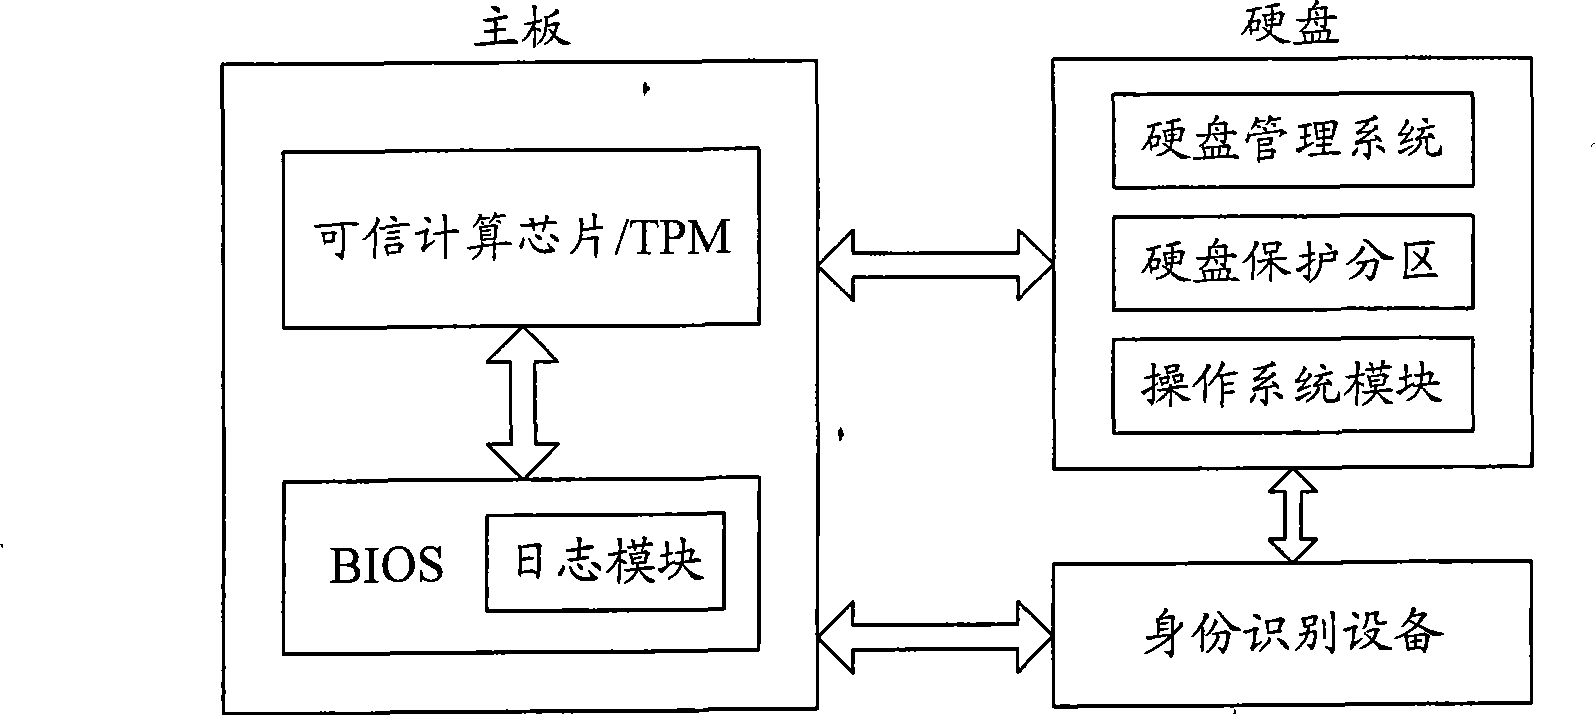 Method for protecting computer system